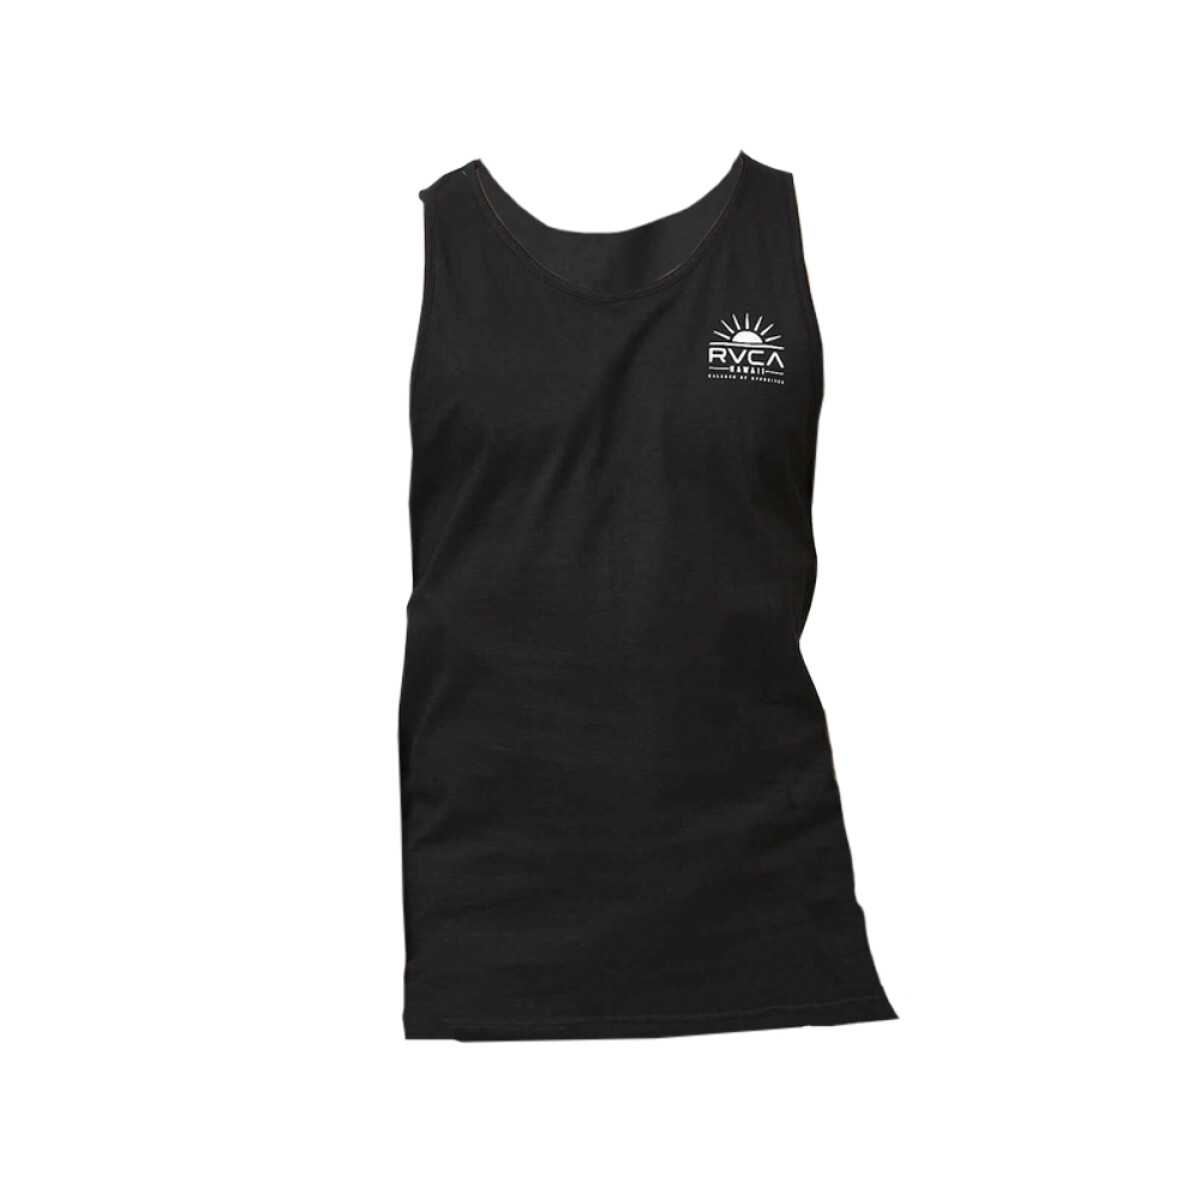 MUSCULOSA NEW DAY SINGLET - BLACK 